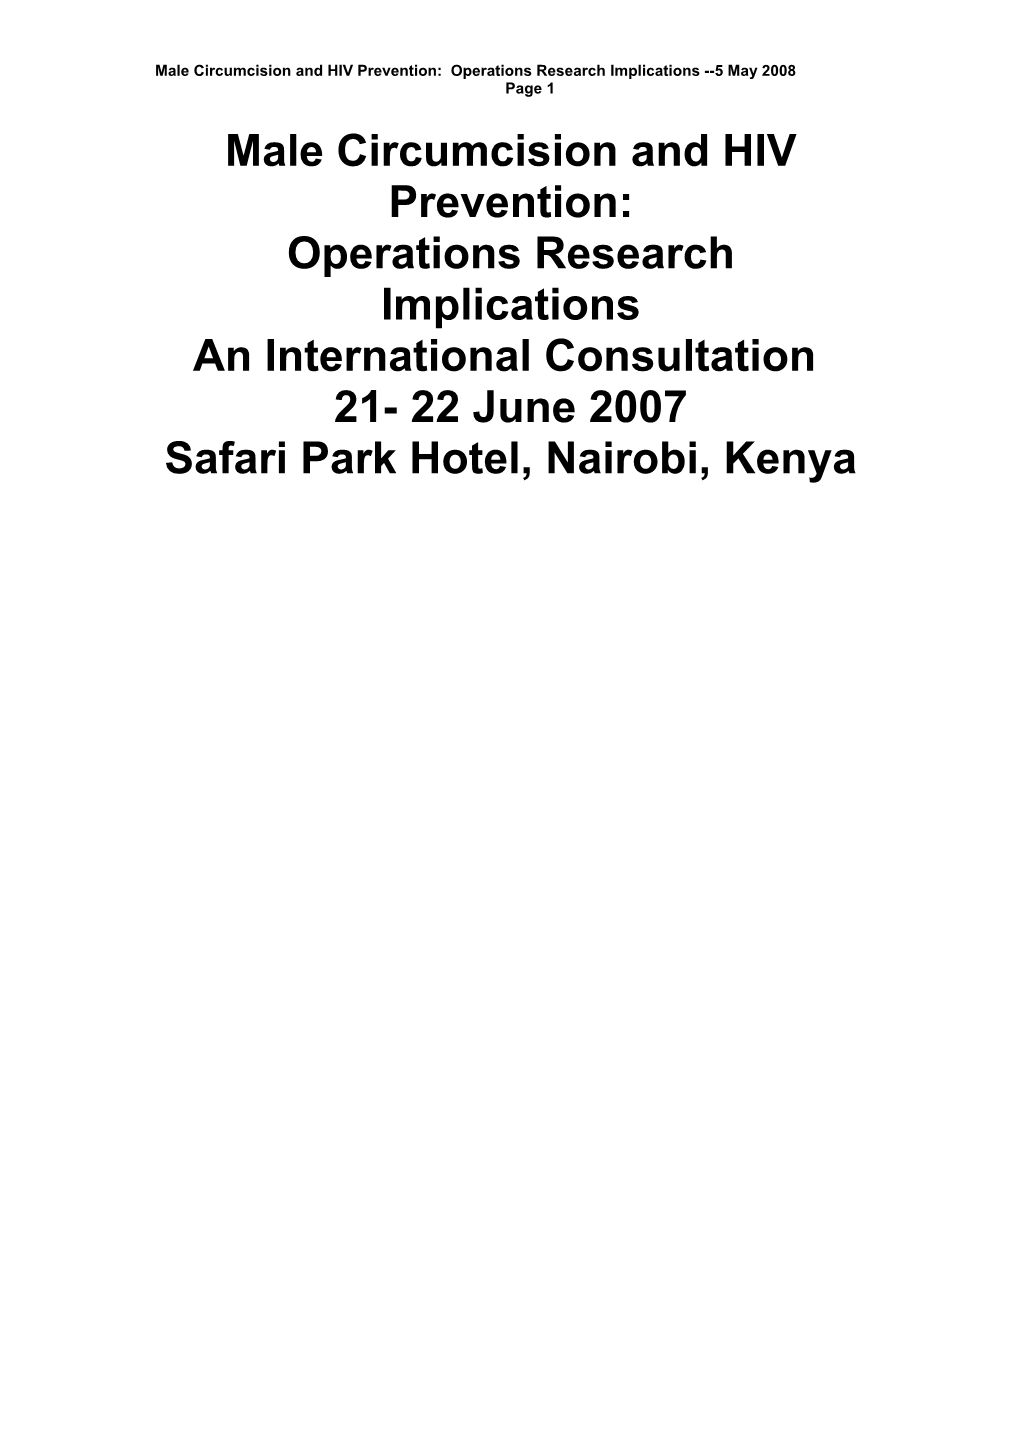 Male Circumcision and HIV Prevention: Operations Research Implications 5May 2008 Page 1